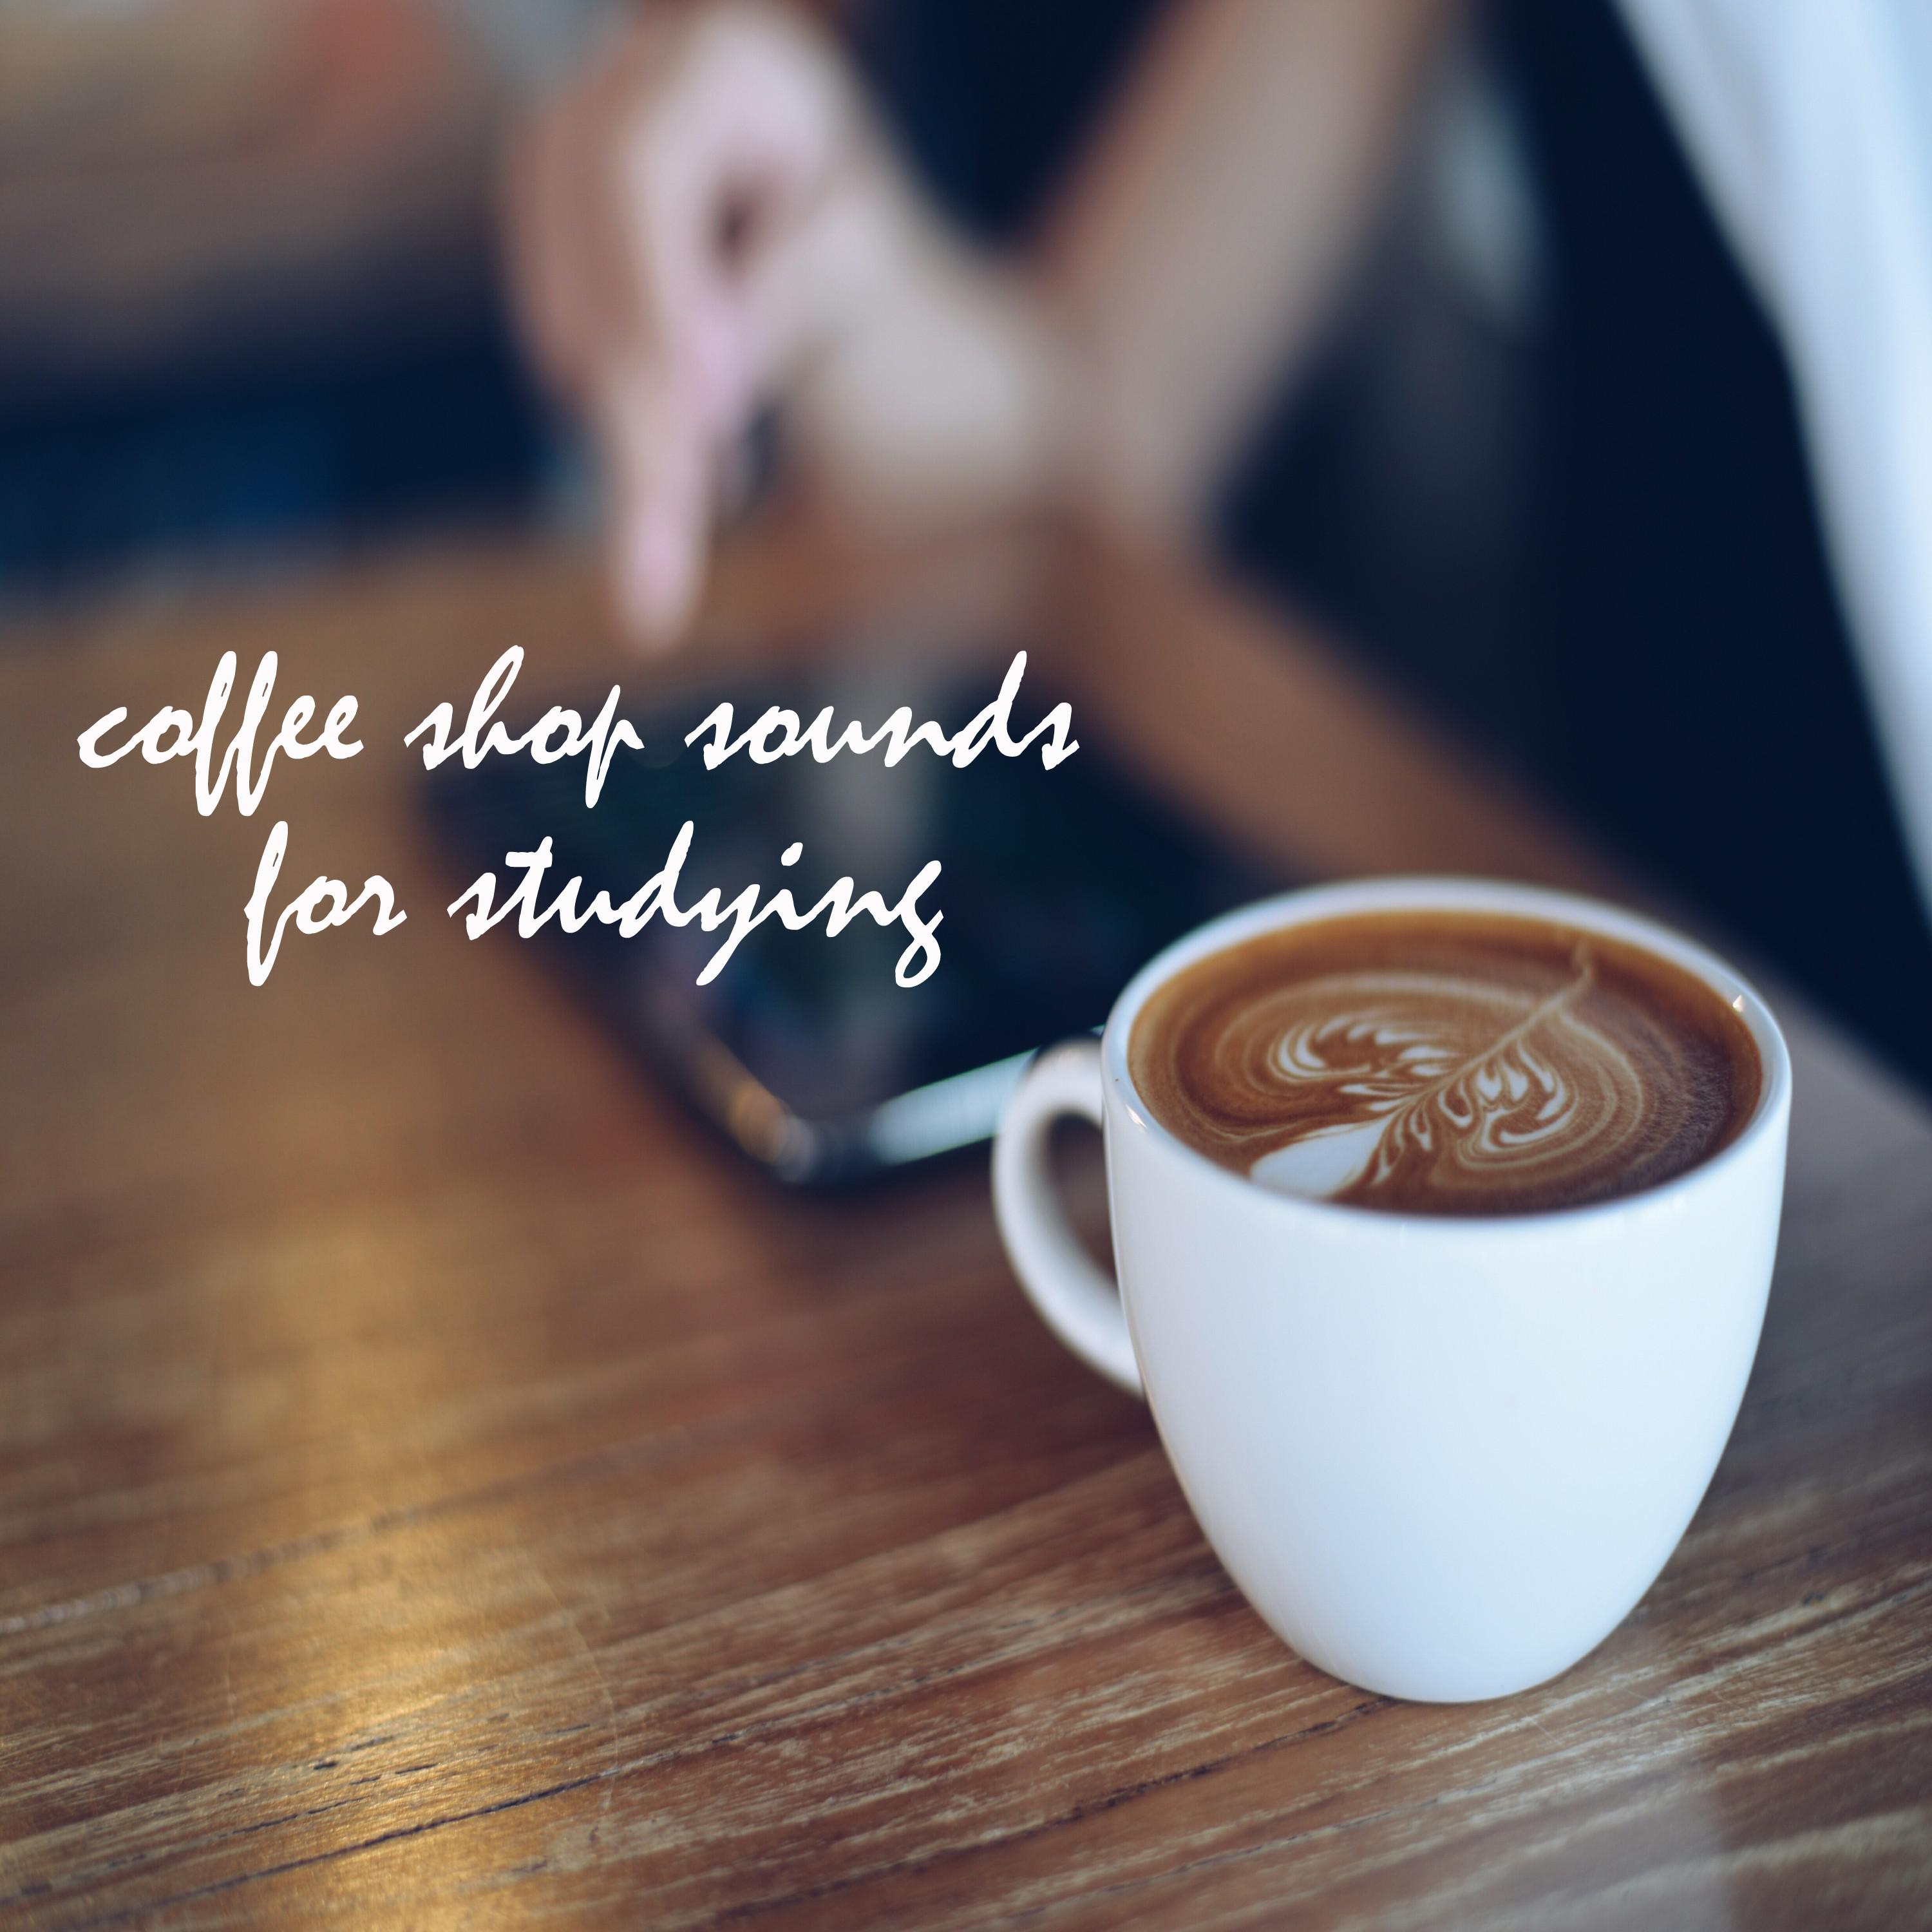 Coffee Shop Sounds for Studying and Working, Pt. 51